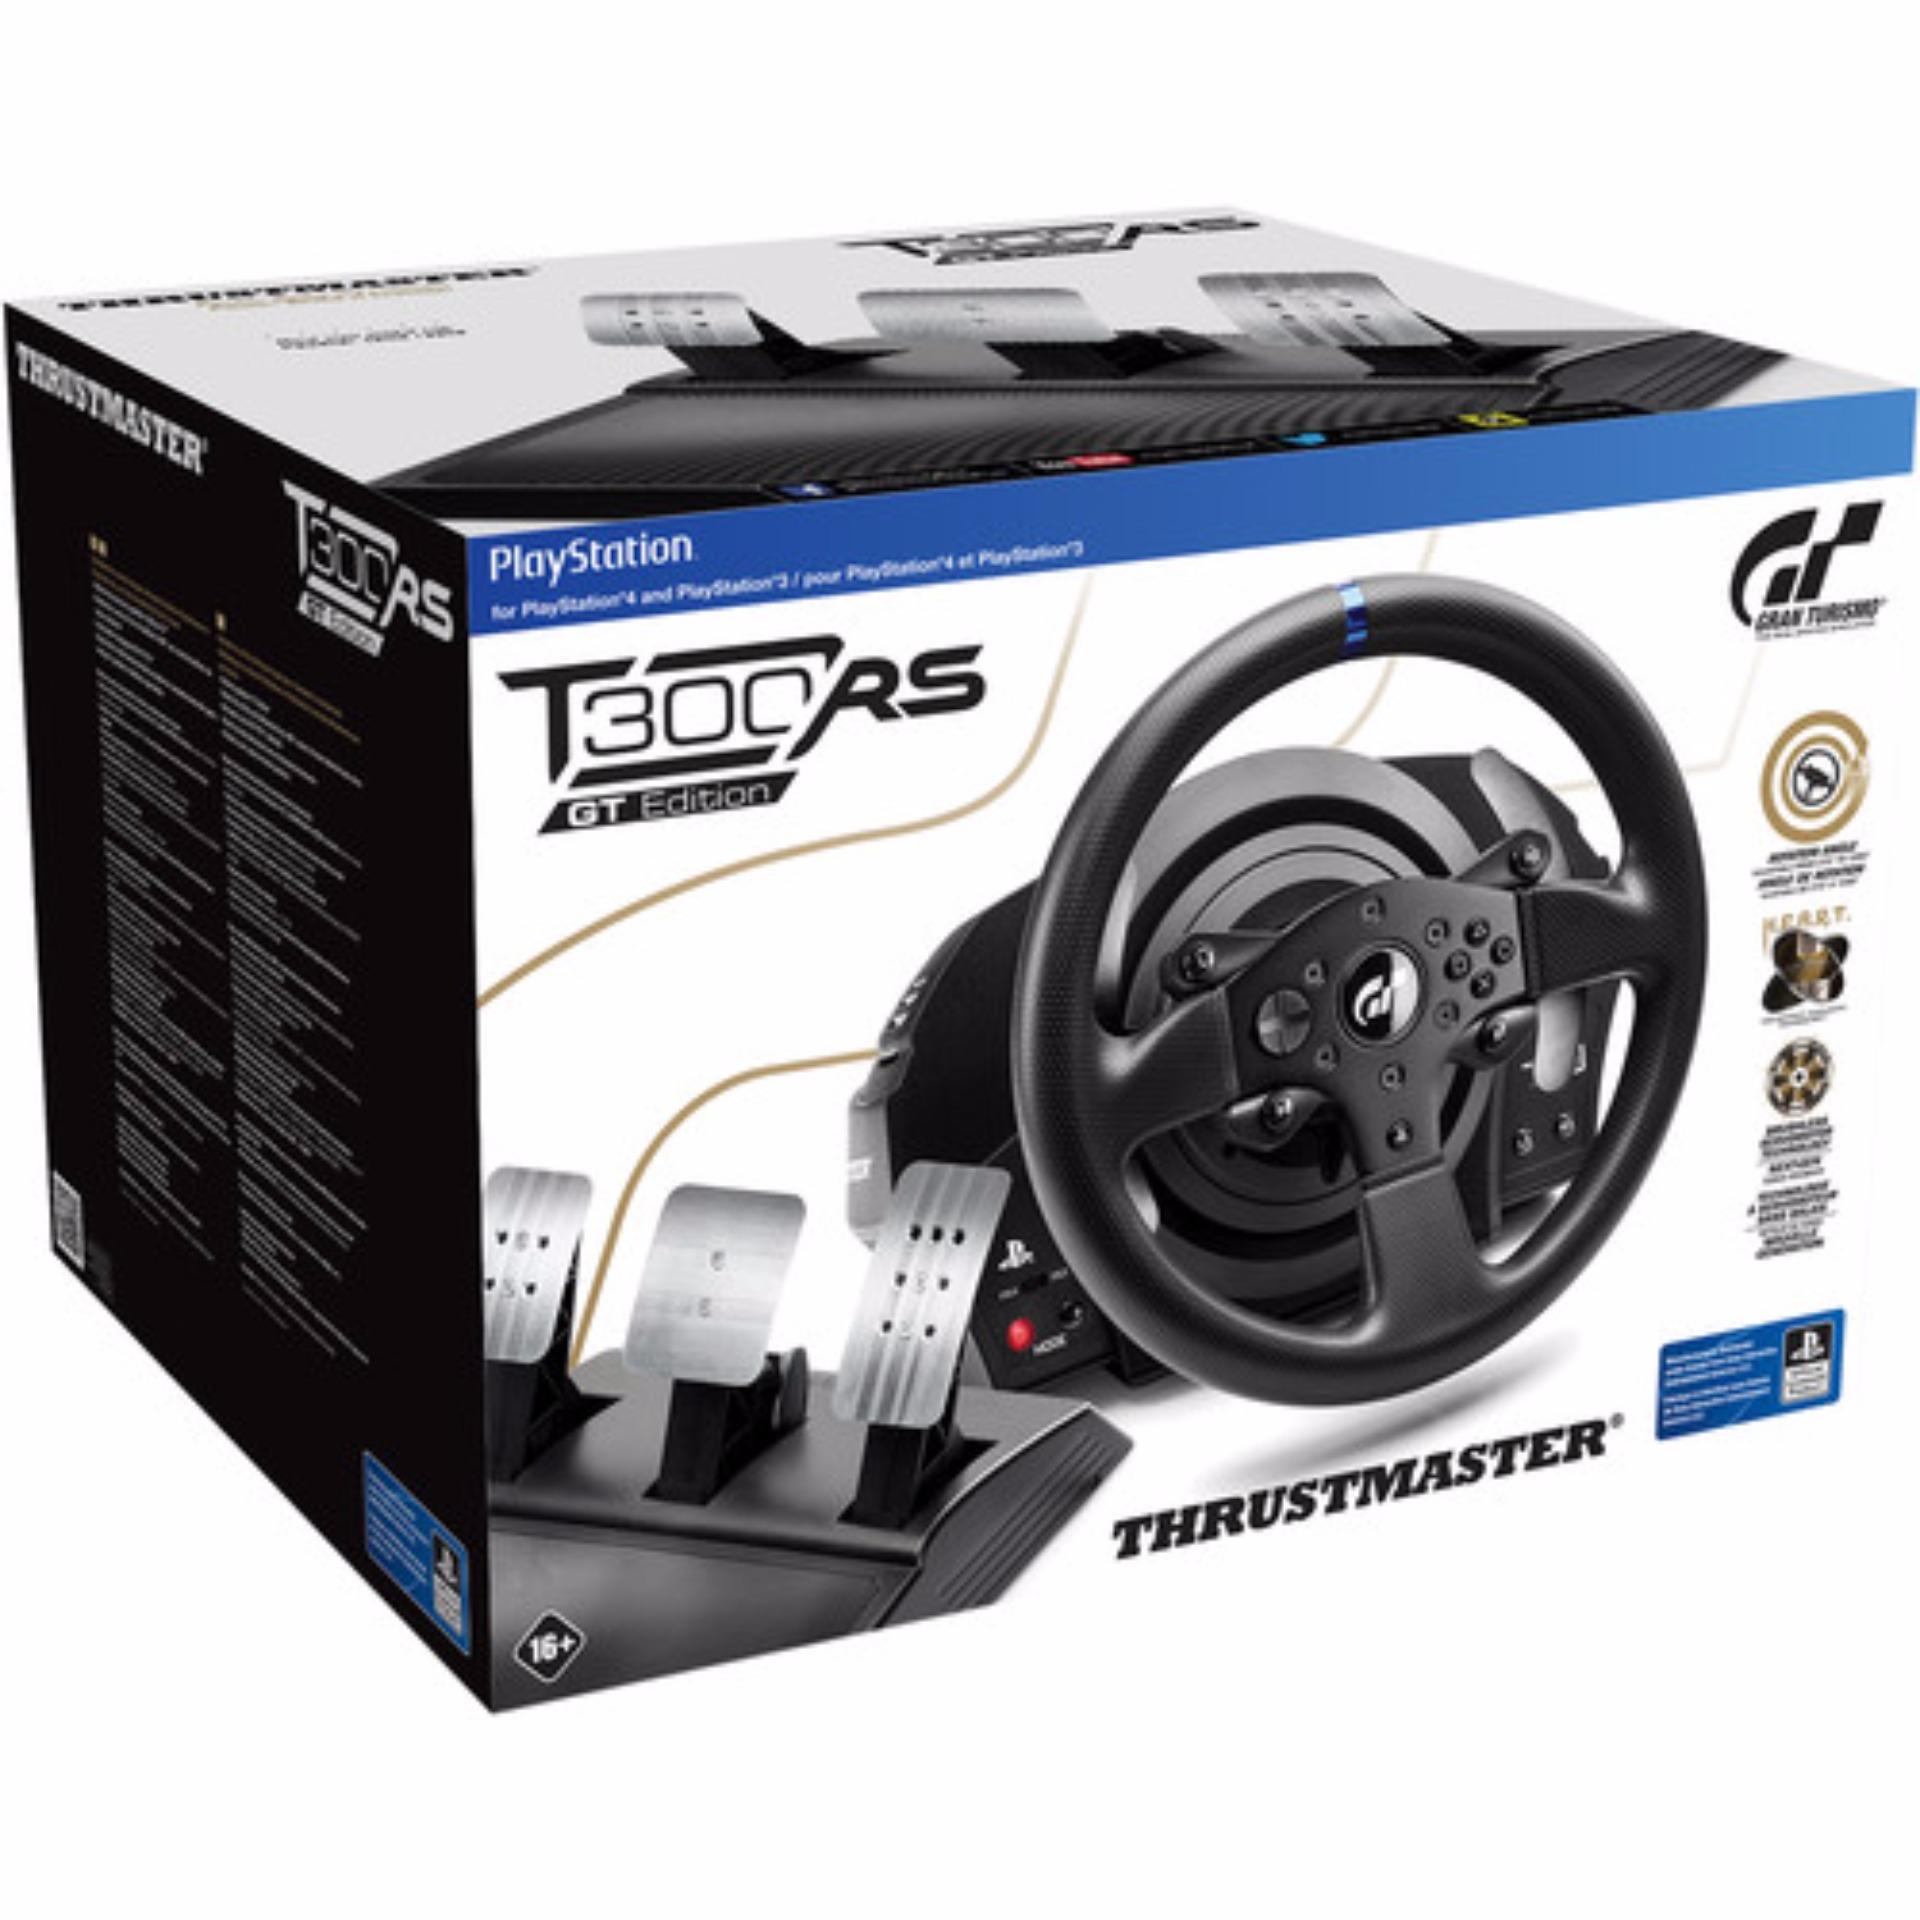 Thrustmaster T300 RS GT EDITION RACING WHEEL Official Force Feedback wheel For PS4/PS3/PC